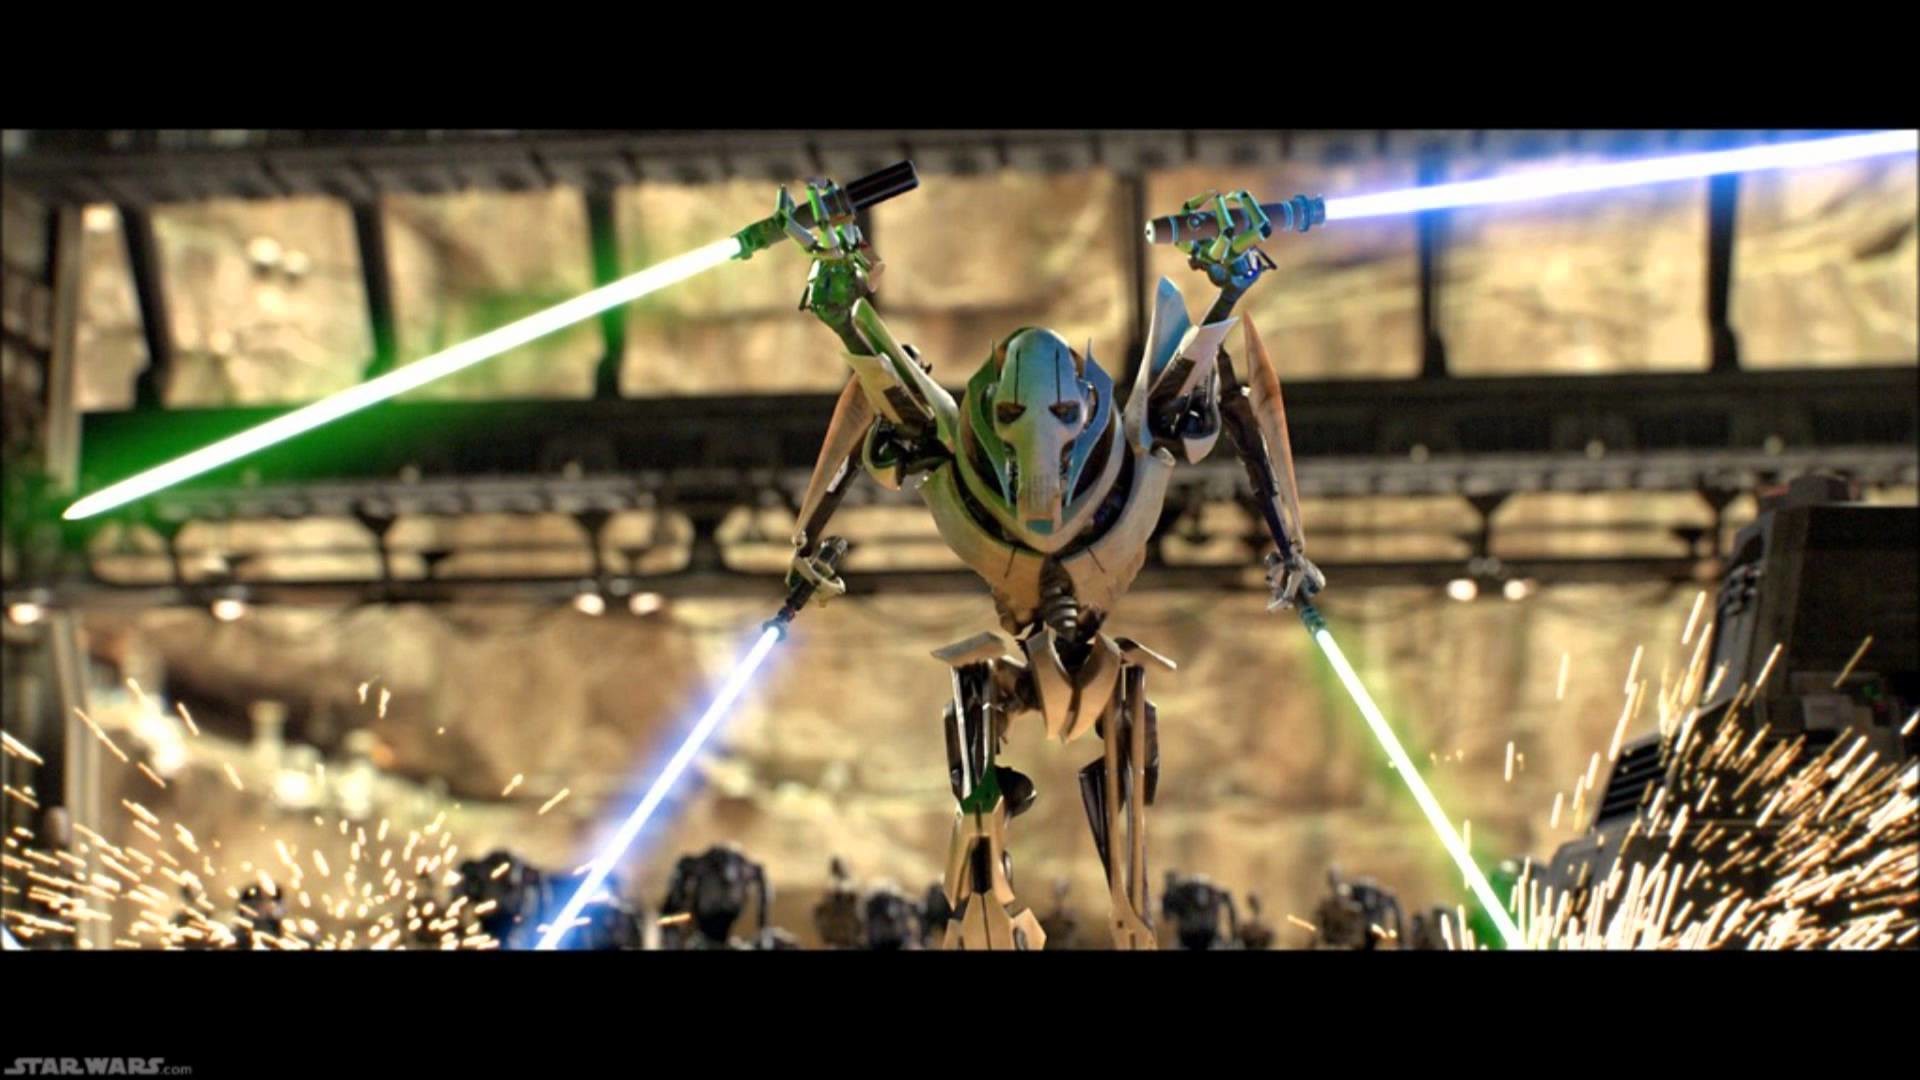 1920x1080 General Grievous star wars tune revenge of the sith